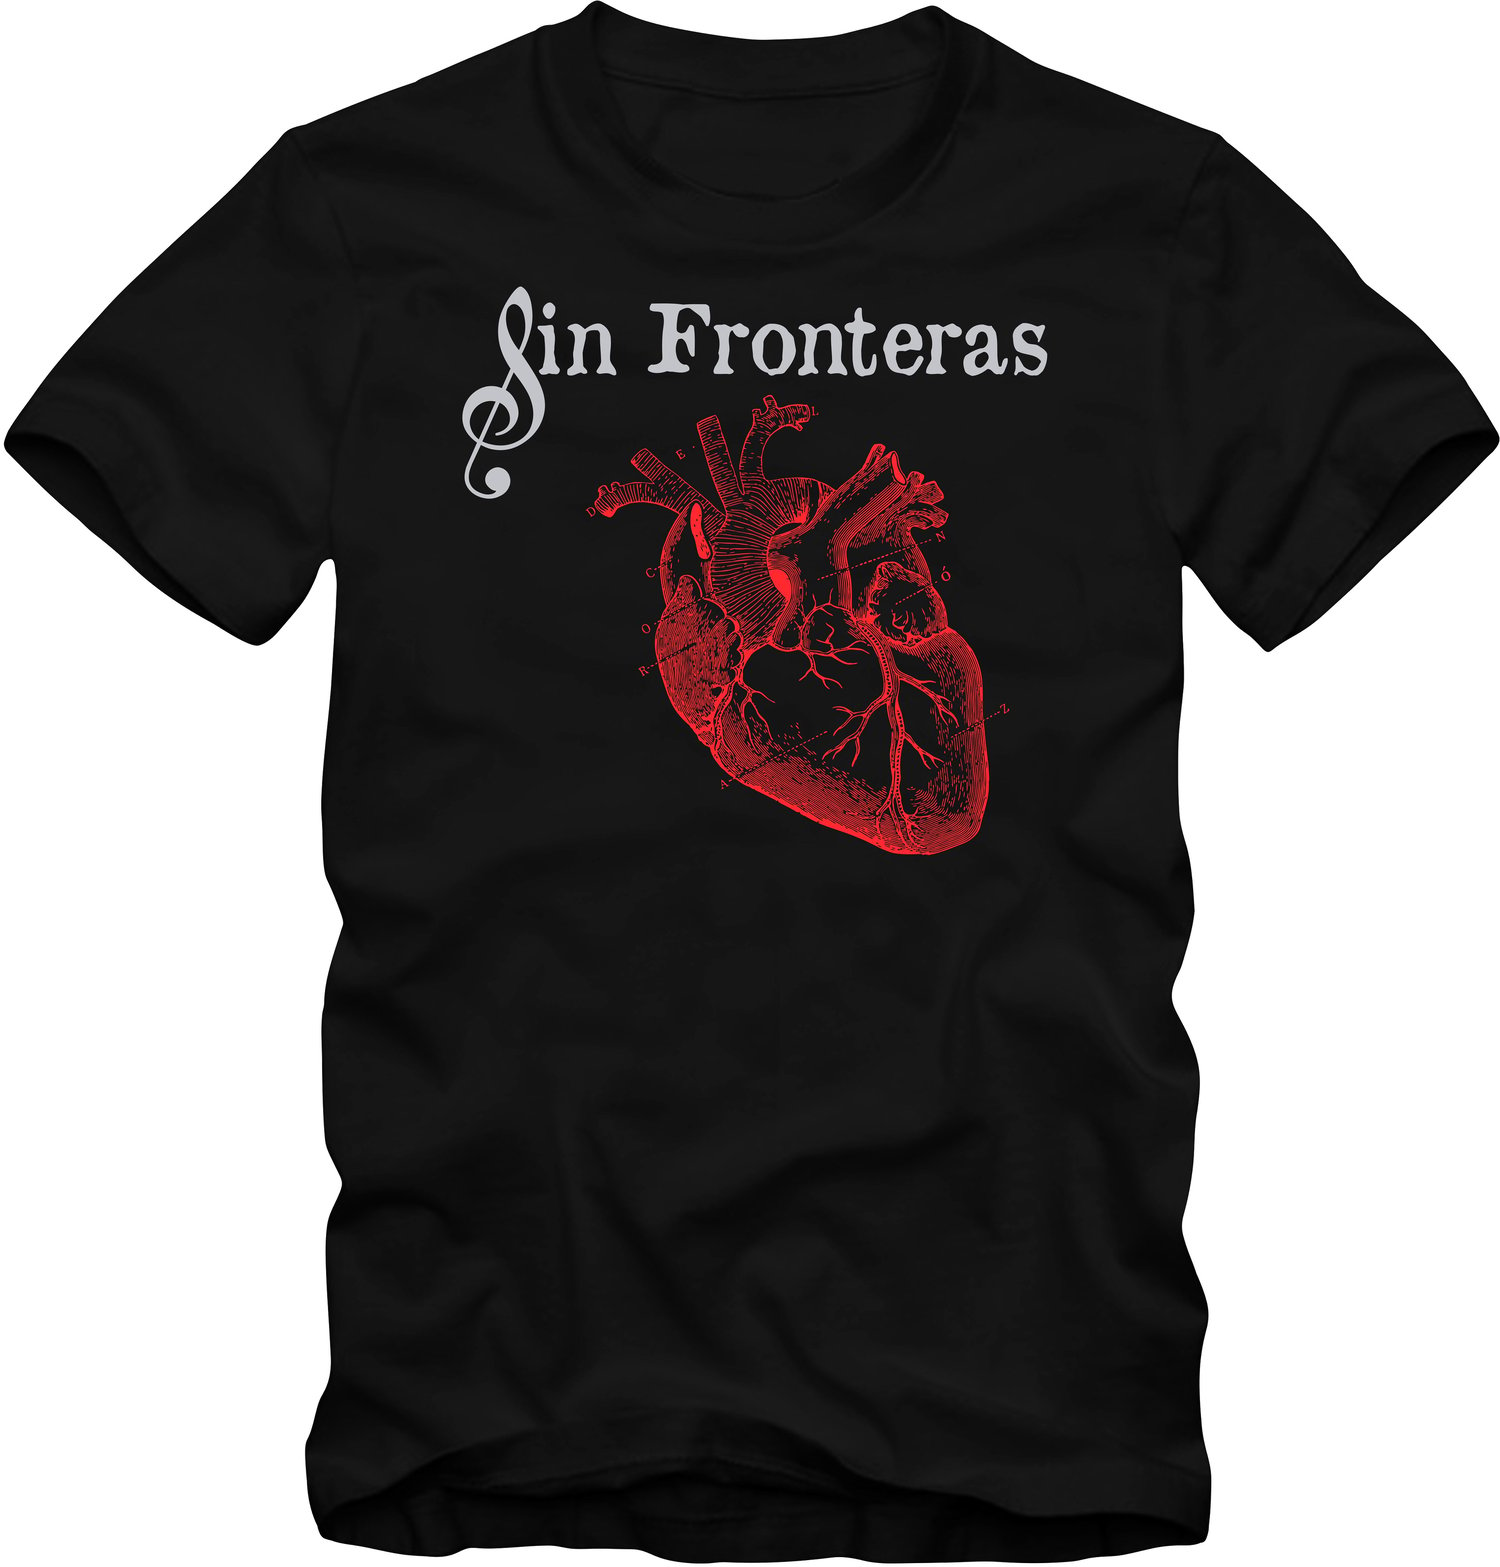 Image of "Sin Fronteras" - The Official T-Shirt of Del Corazón Music - "Unisex" / "Mens"